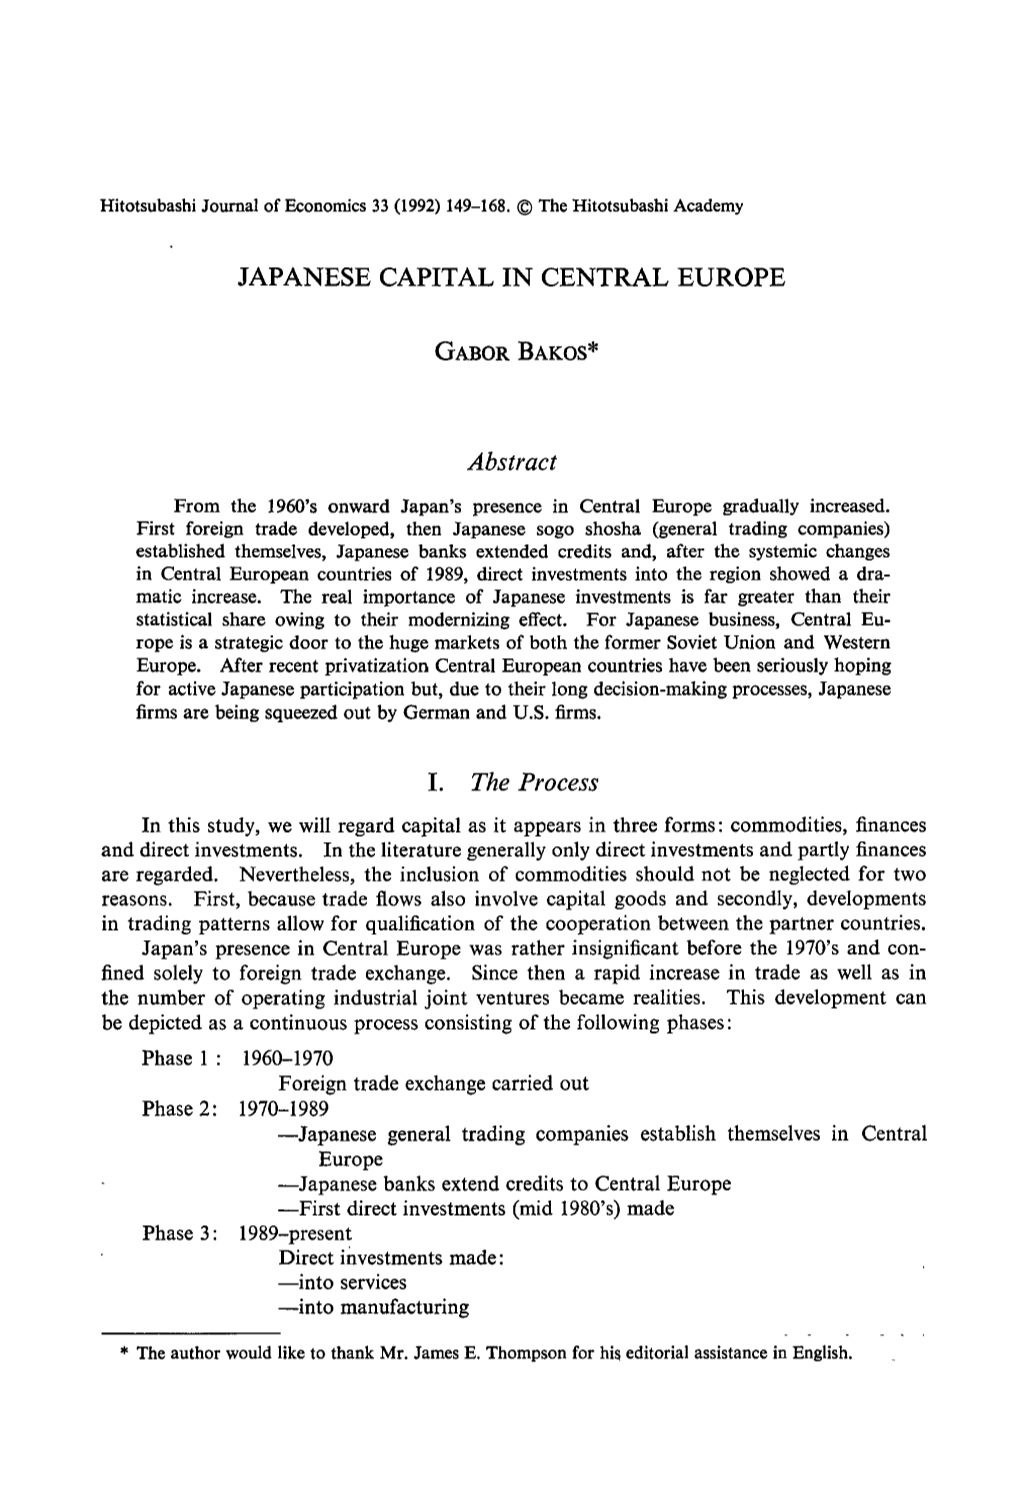 Japanese Capital in Central Europe